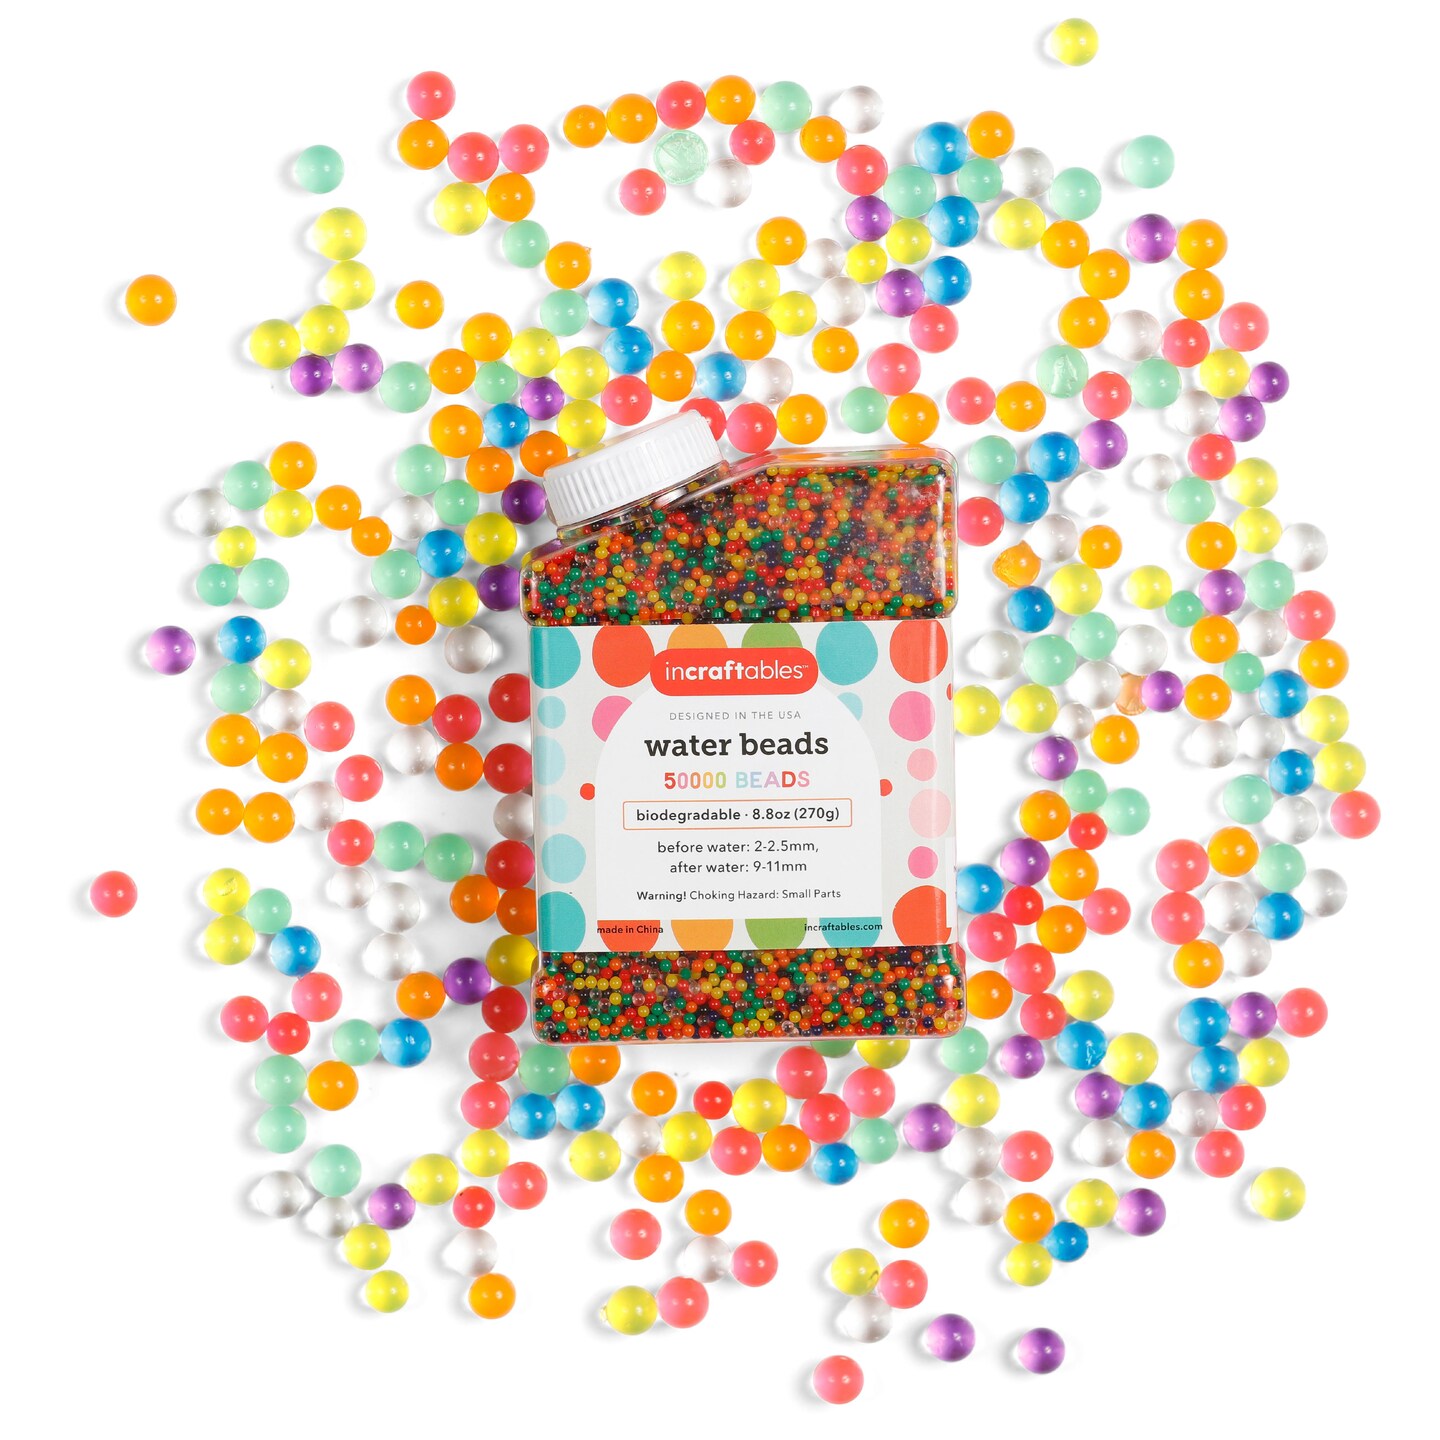 Buy 20,000 Rainbow Water Beads for Kids Non Toxic - Water Table